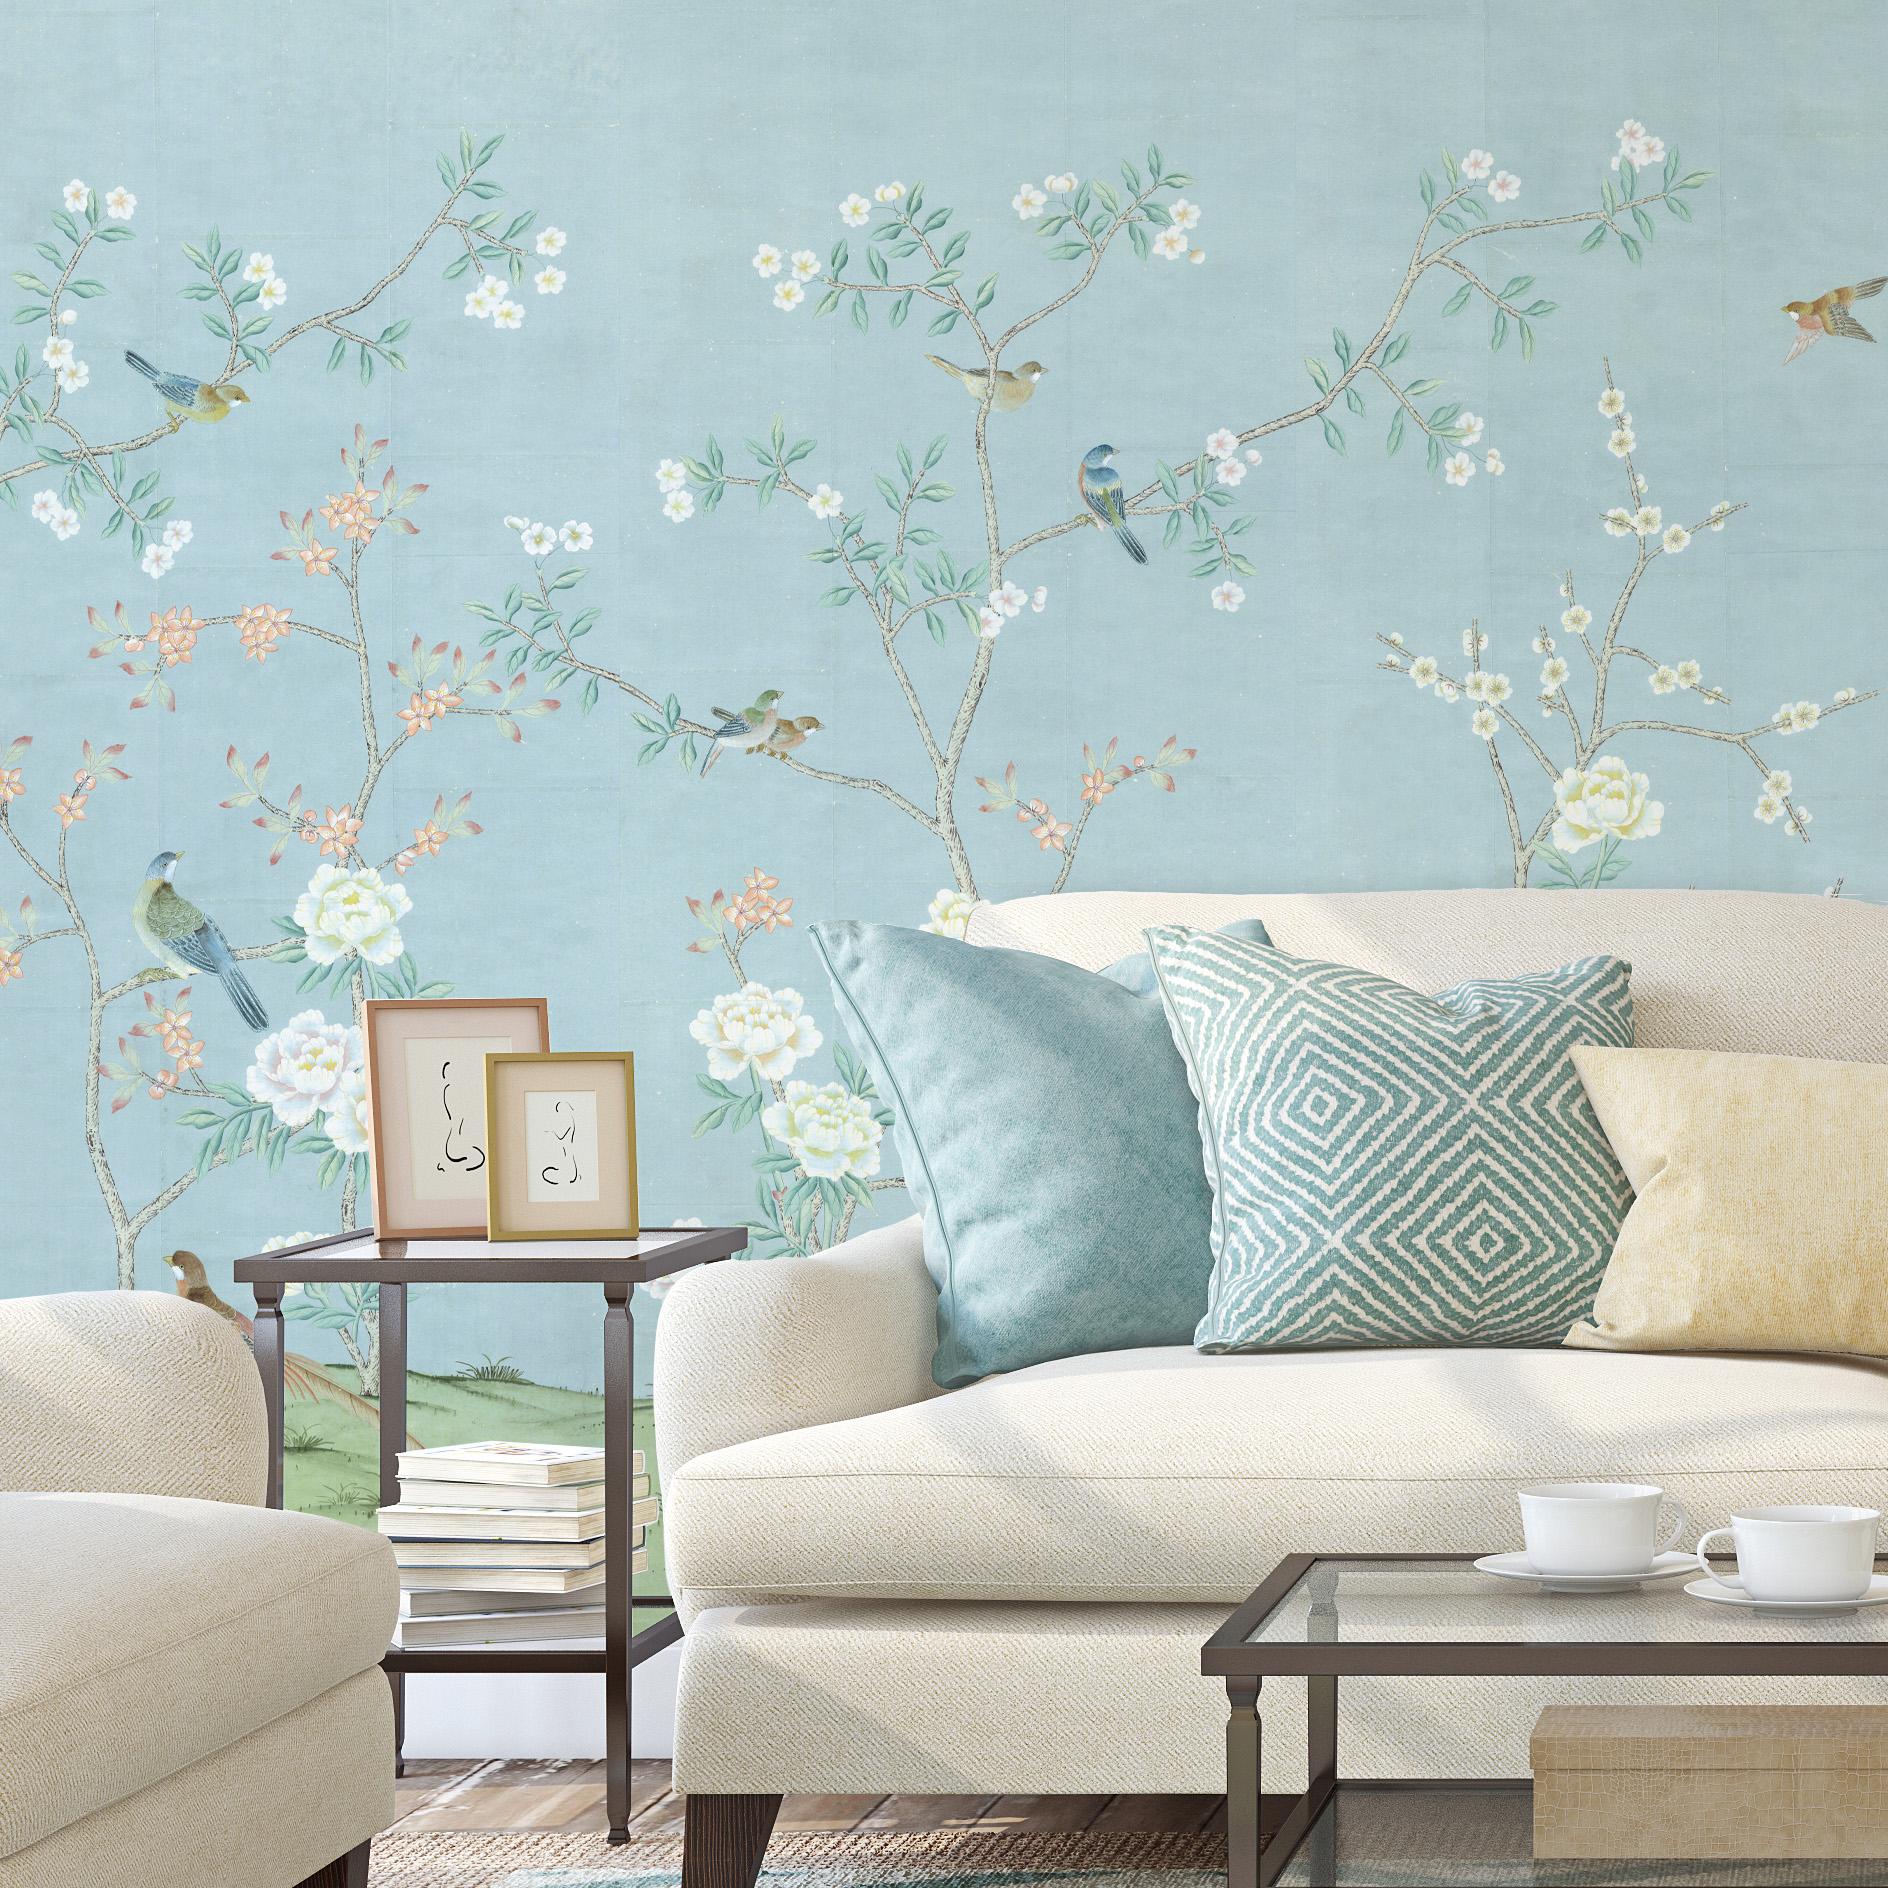 Maysong Spring is a beautiful chinoiserie mural wallpaper with large white blooms on a cool blue background. This design can add visual interest or color to any bedroom, living room, or any room in your apartment or home. This mural has 4 panels